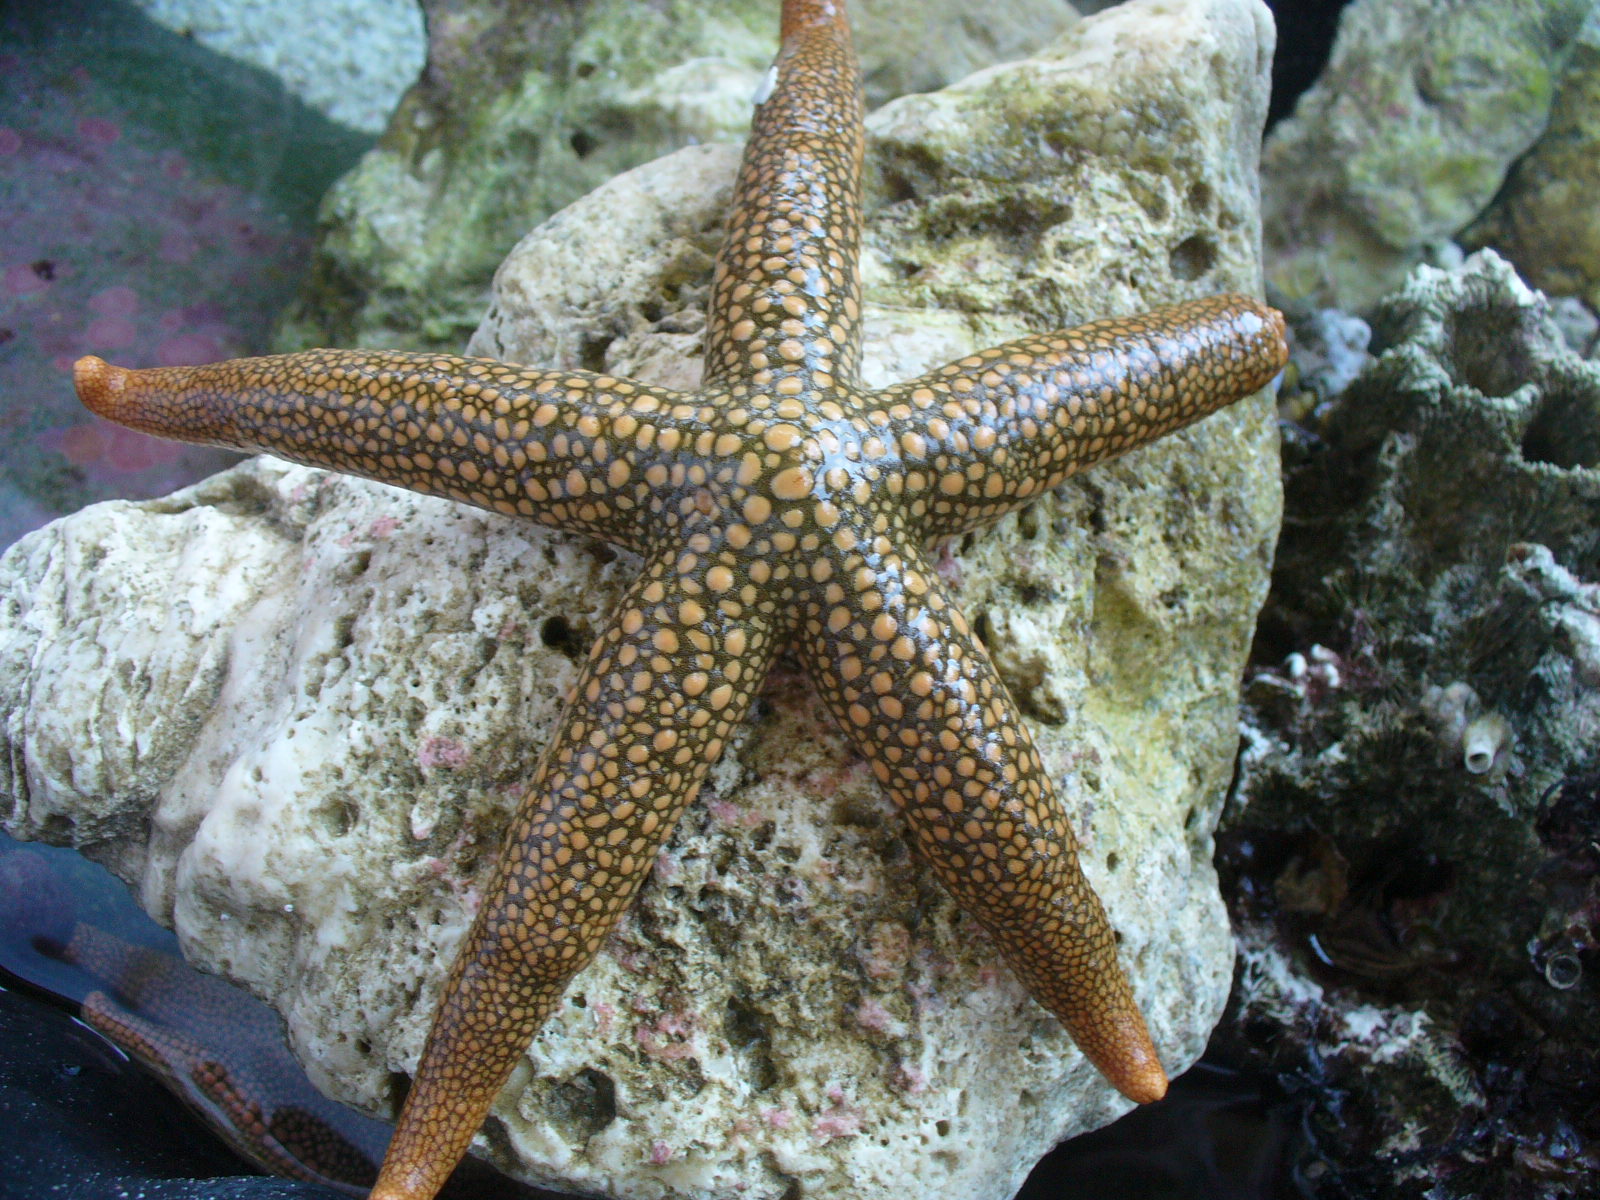 two starfishs are swimming around in some water